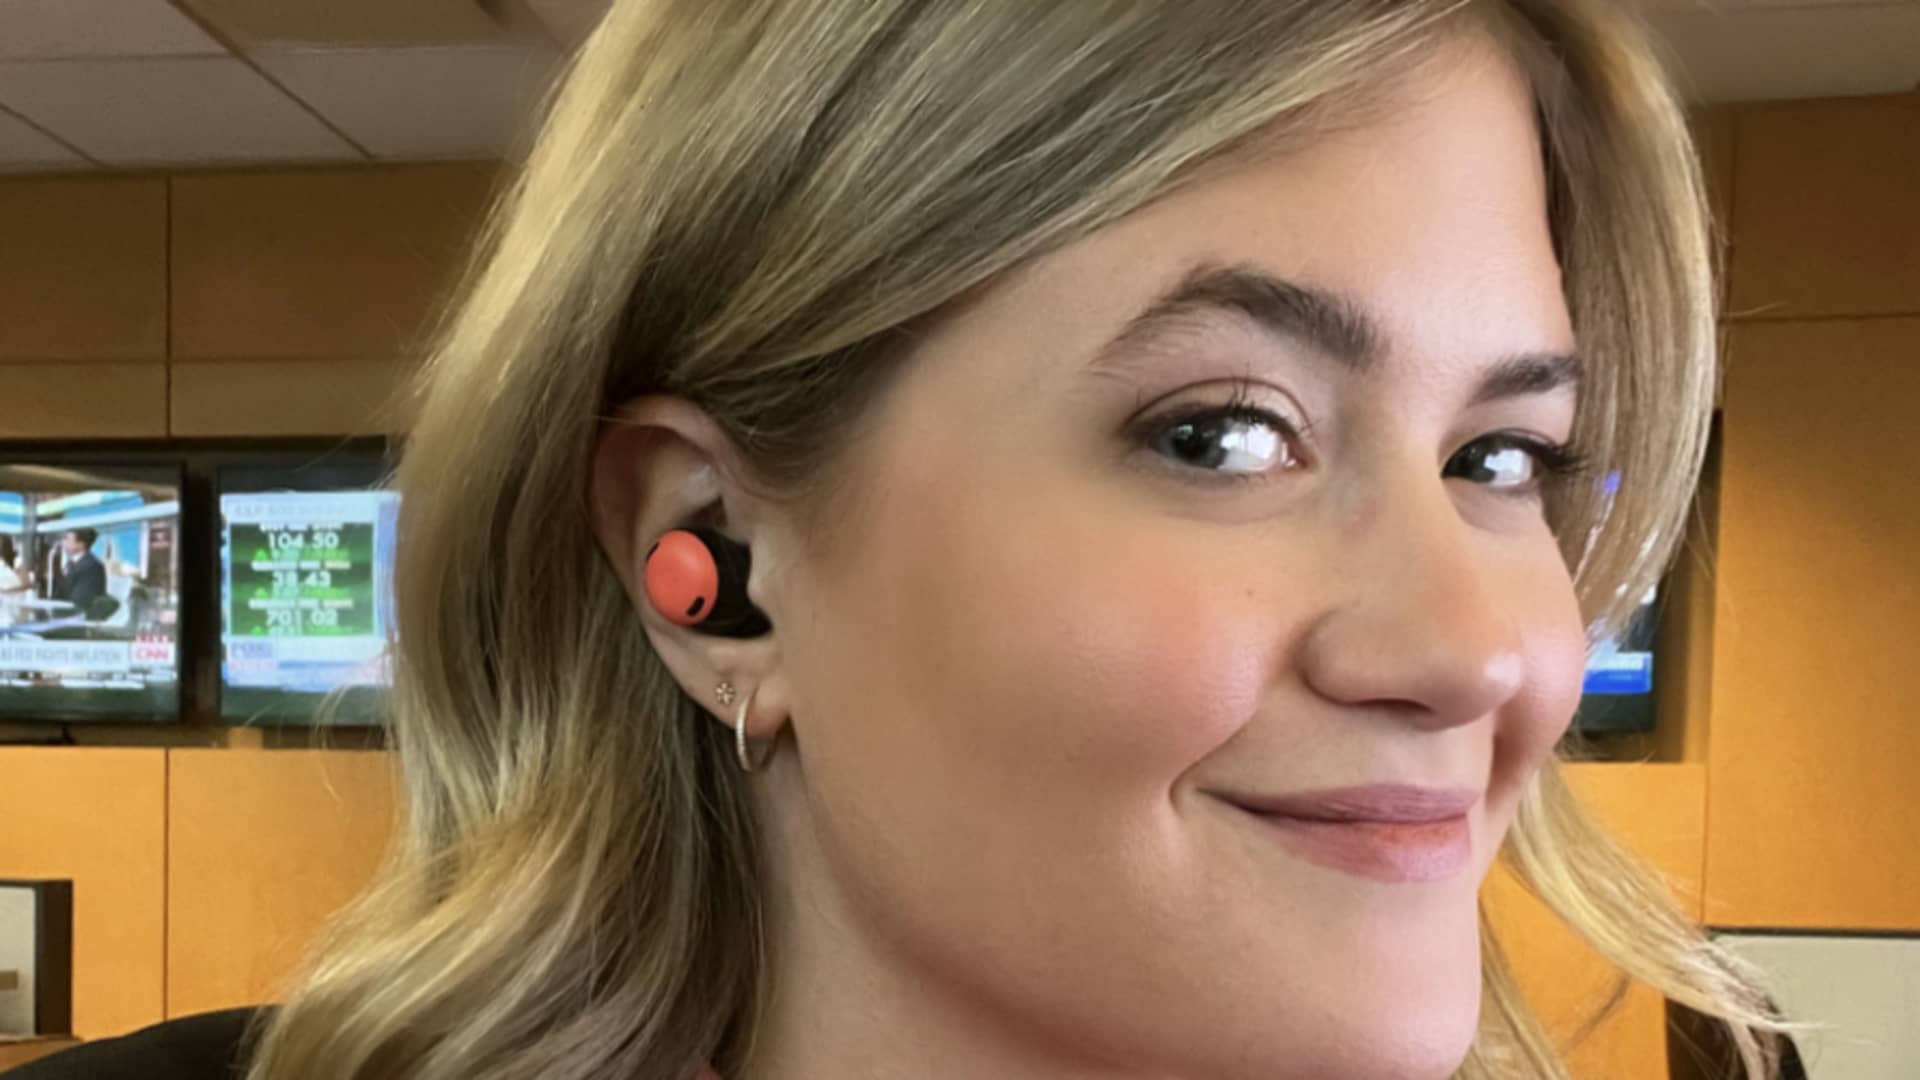 Google Pixel Buds Pro review: They don't measure up to AirPods Pro